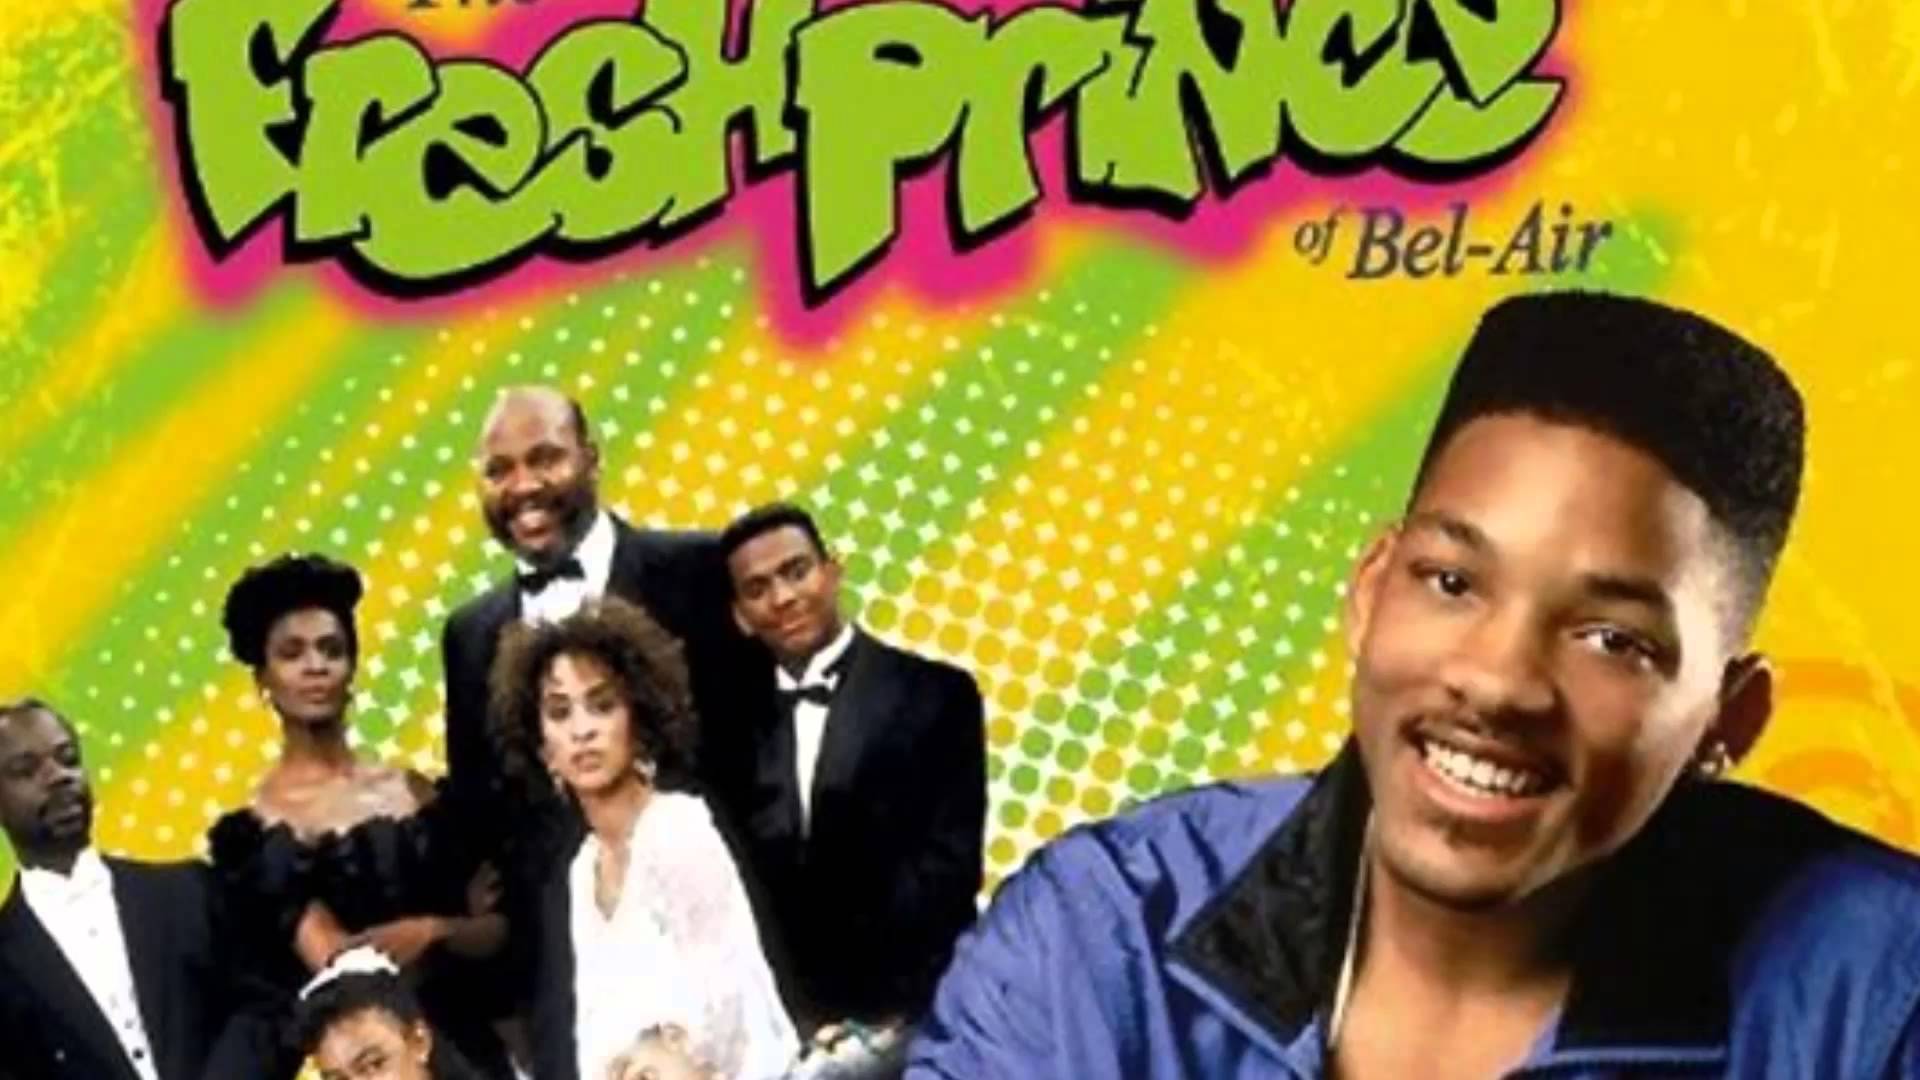 Download Will Smith  The Fresh Prince of BelAir Wallpaper  Wallpaperscom